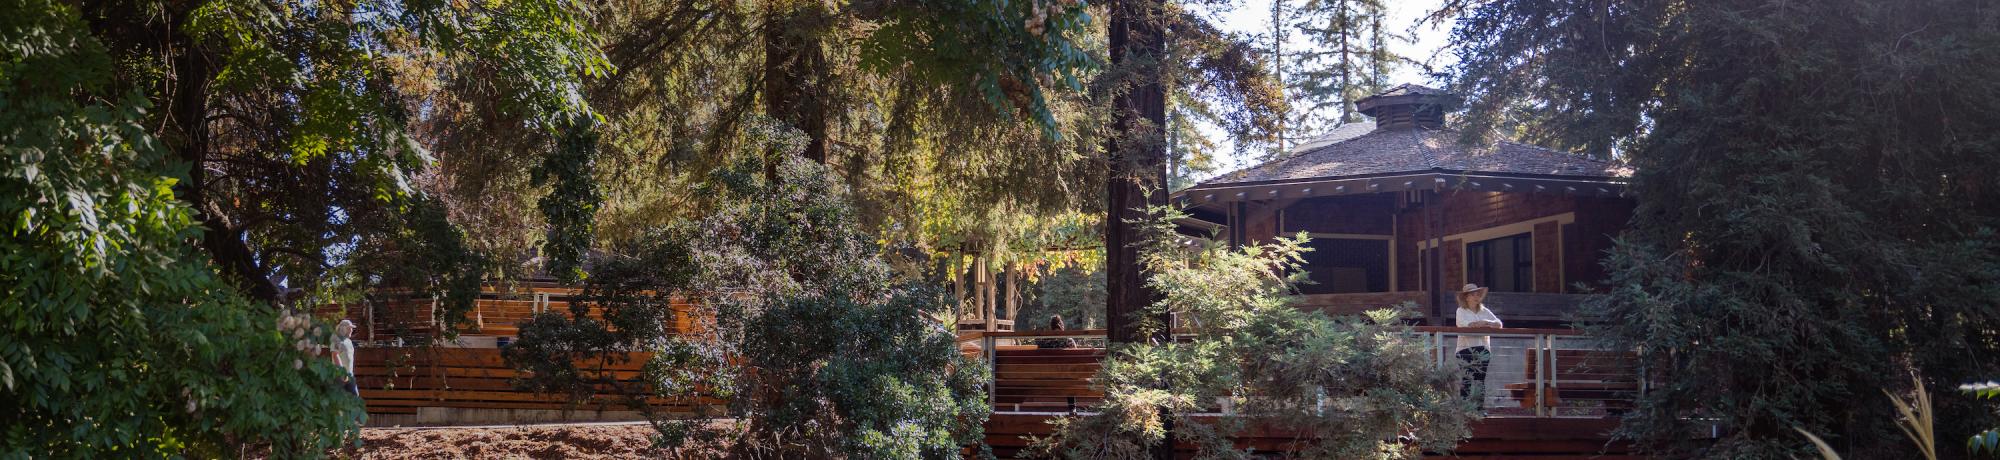 Redwoods surround Wyatt Deck, a visitor looks out